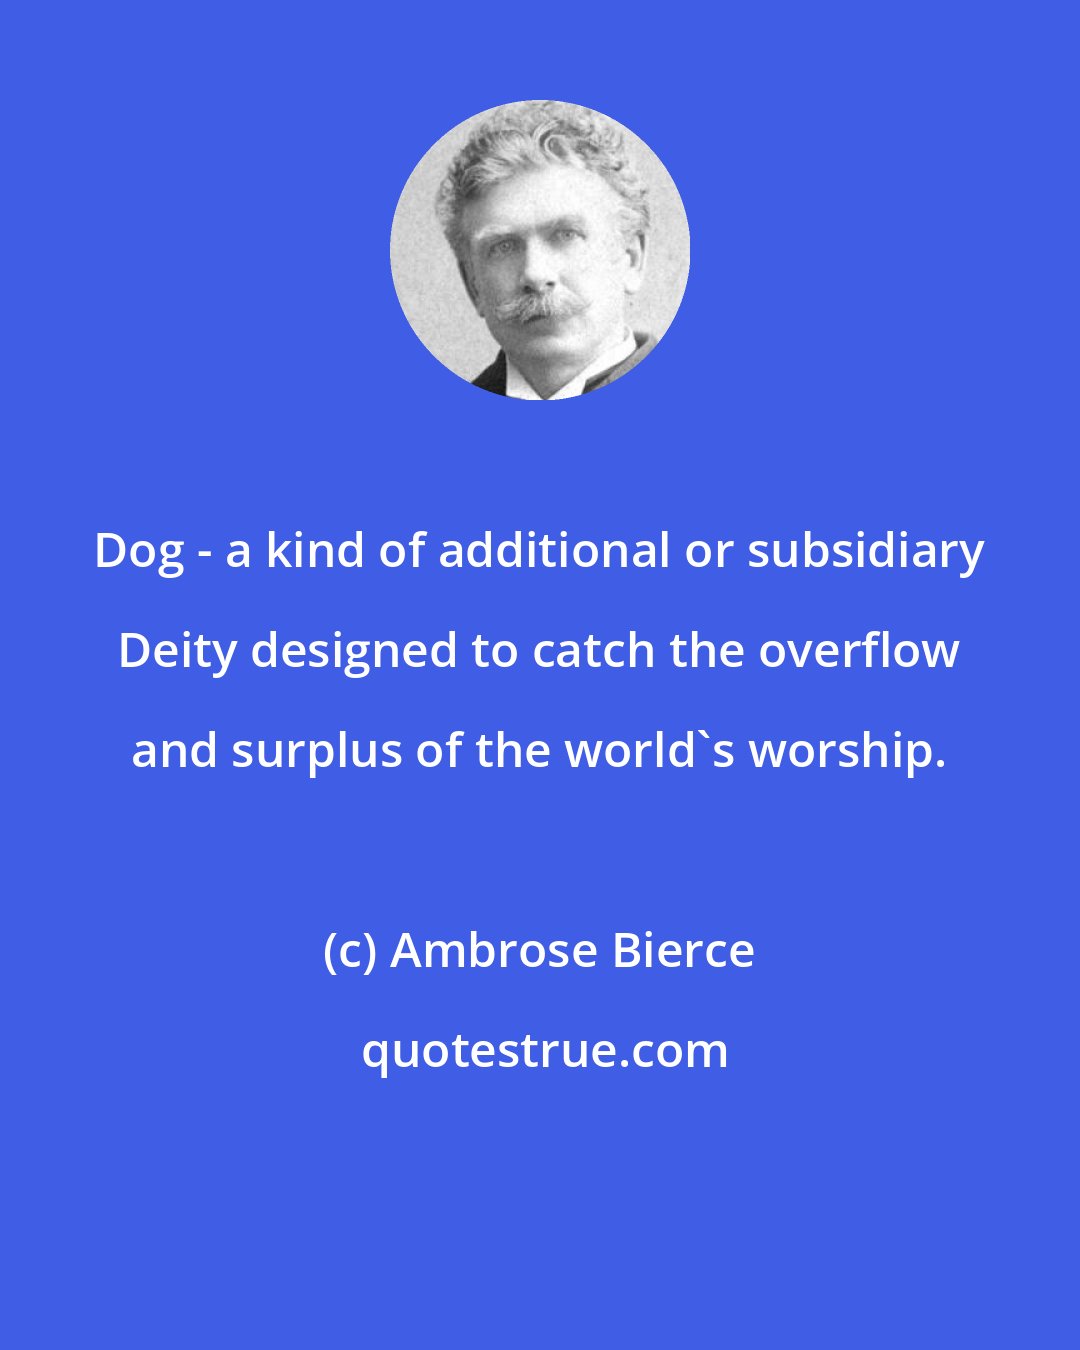 Ambrose Bierce: Dog - a kind of additional or subsidiary Deity designed to catch the overflow and surplus of the world's worship.